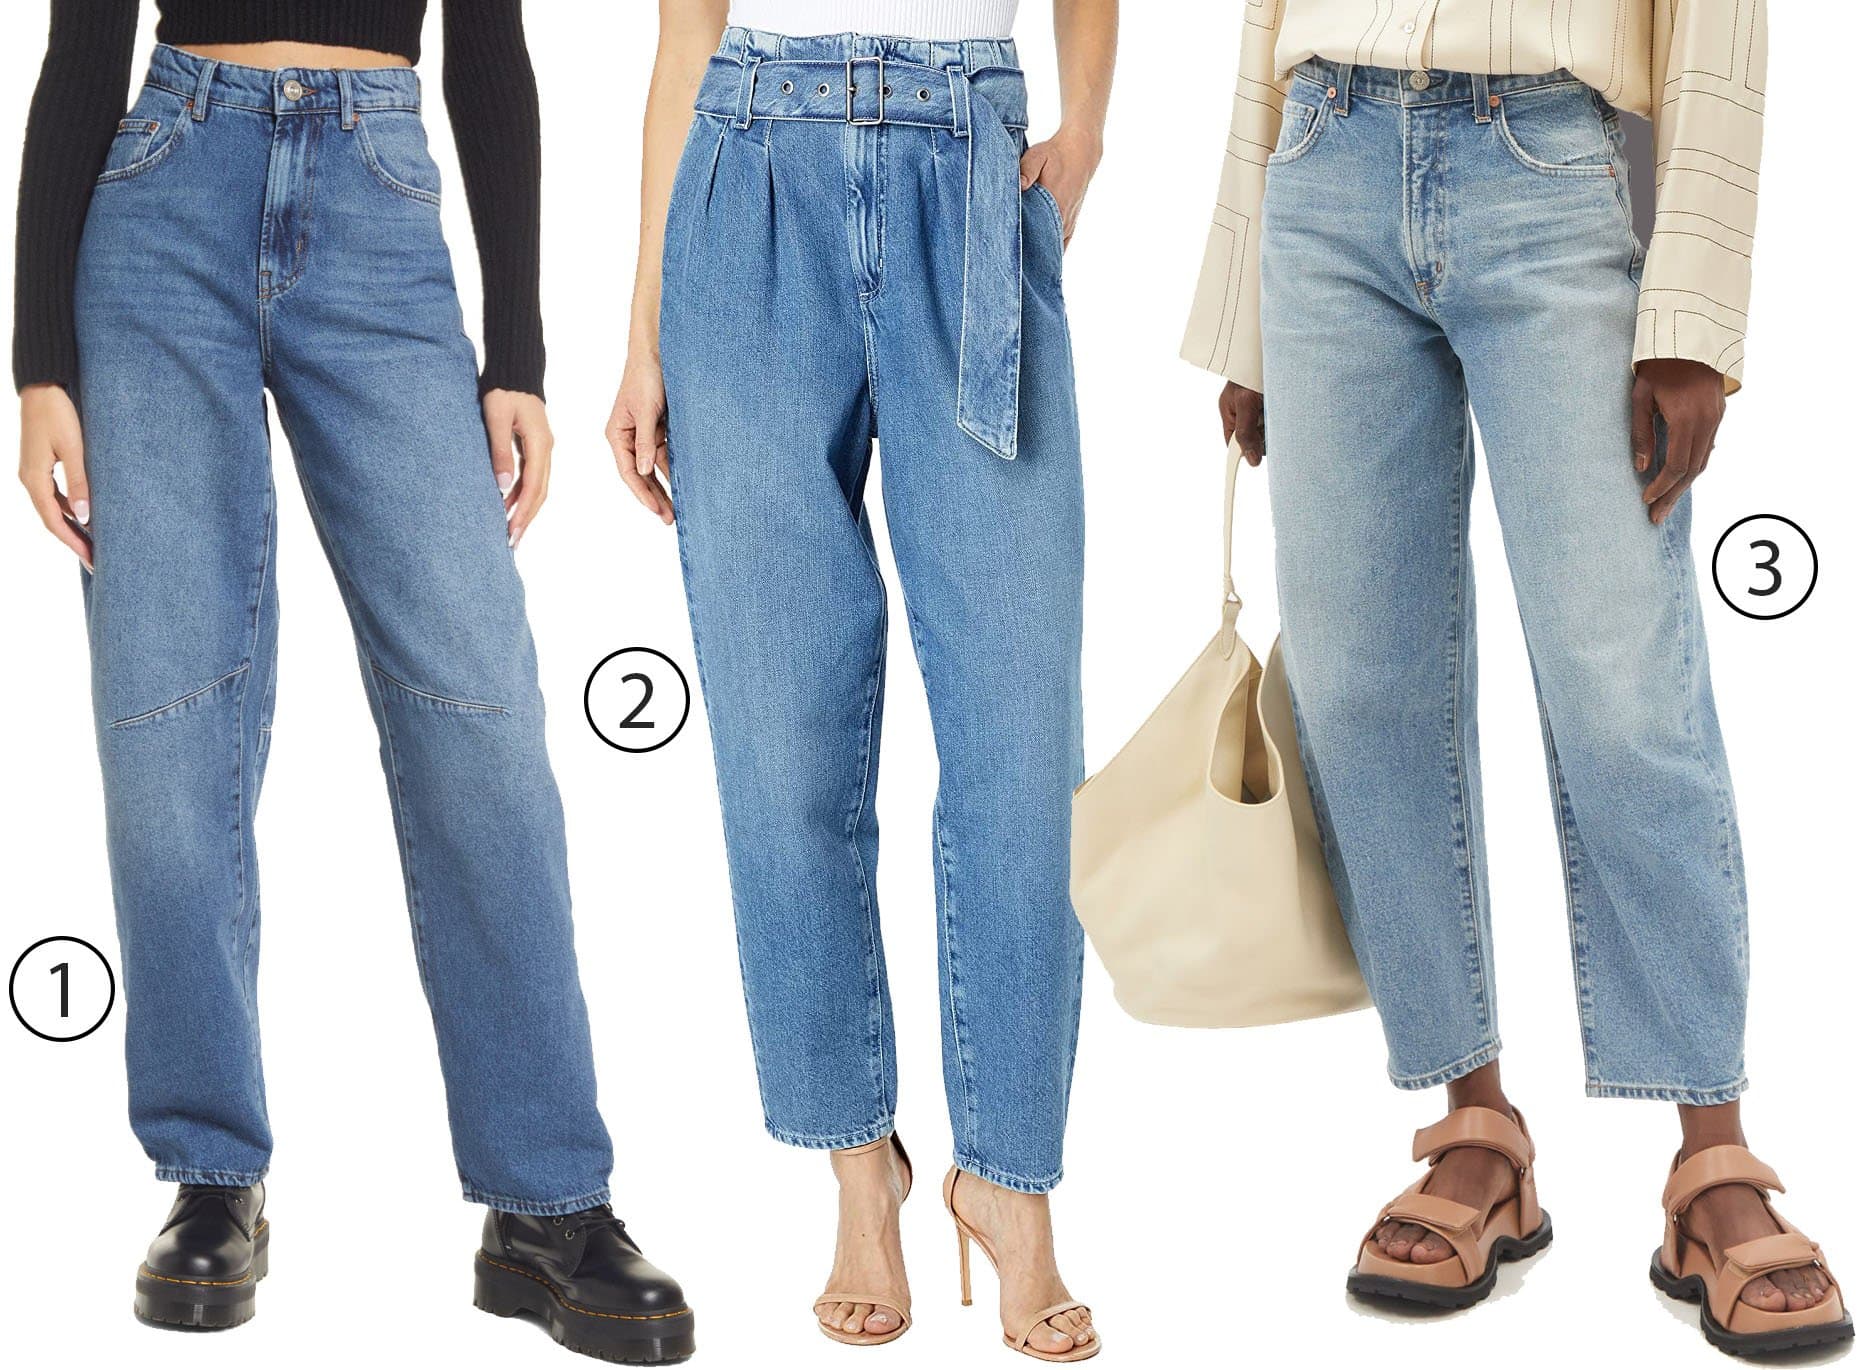 BDG Urban Outfitters Logan barrel-leg jeans, AG Adriano Goldschmied Renn high-rise barrel jeans, and Citizens of Humanity Calista cropped barrel-leg jeans for a sleek, modern twist